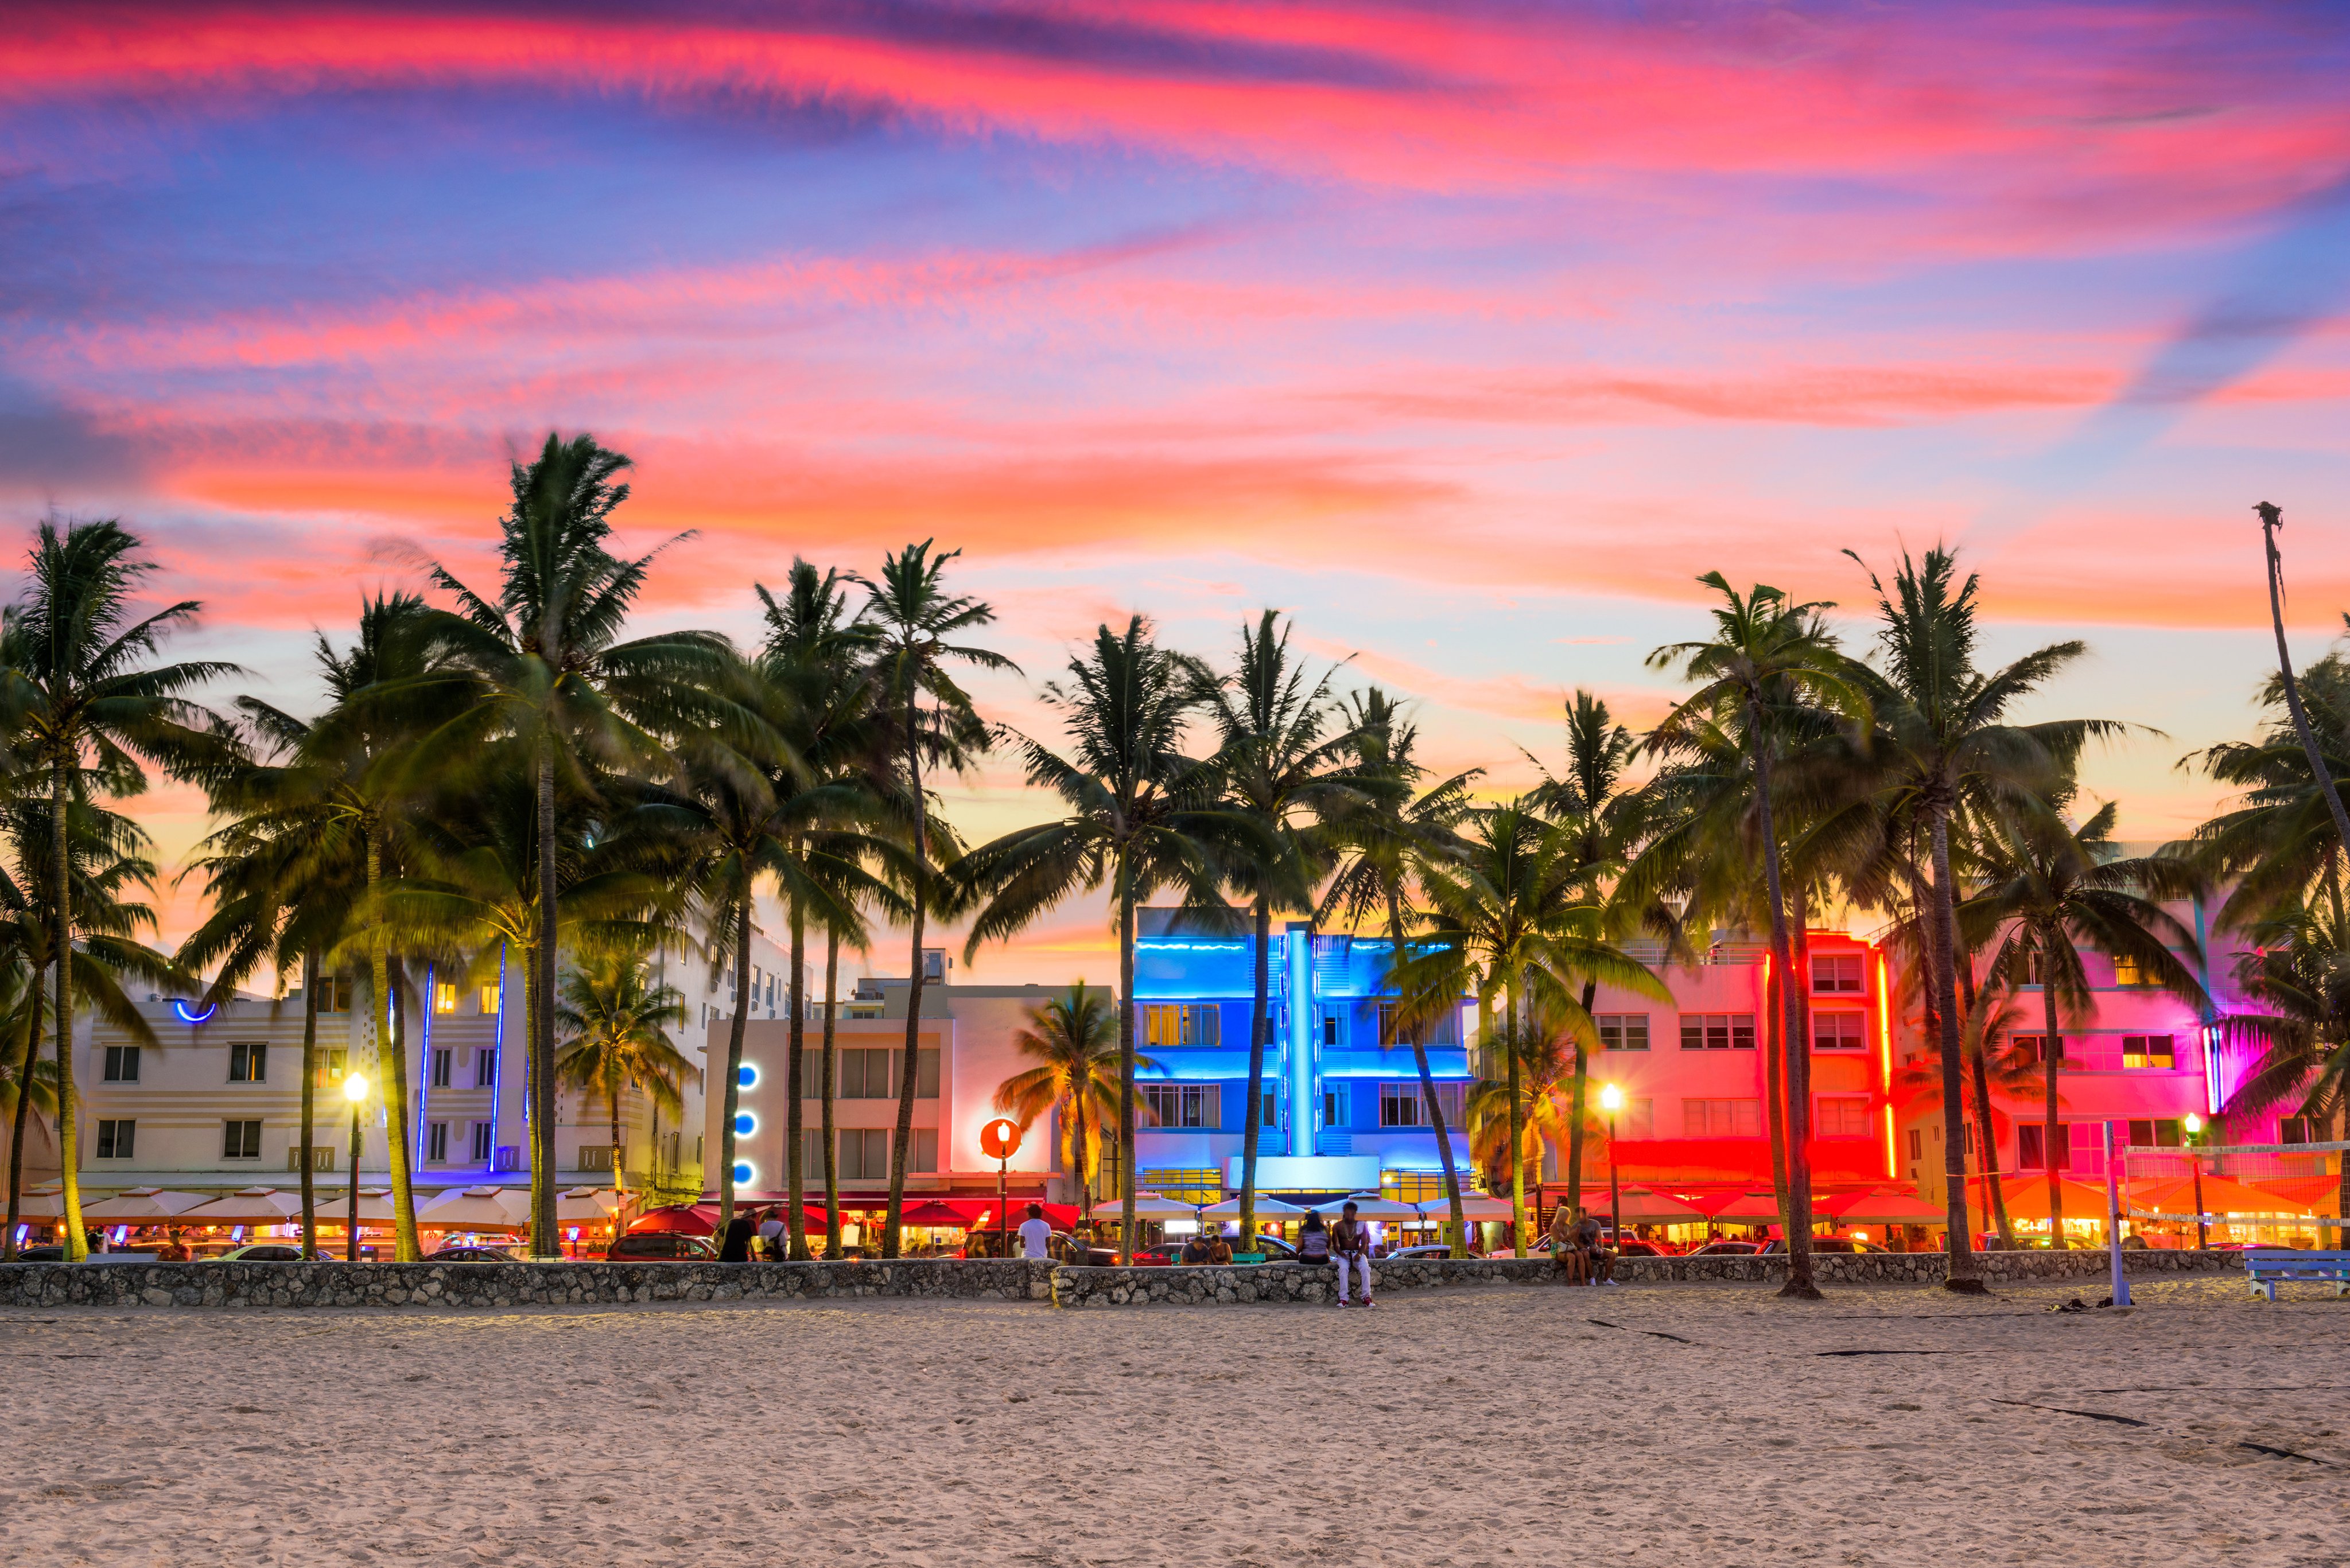 Ocean Drive in Miami’s South Beach, at sunset. Photo: Shutterstock